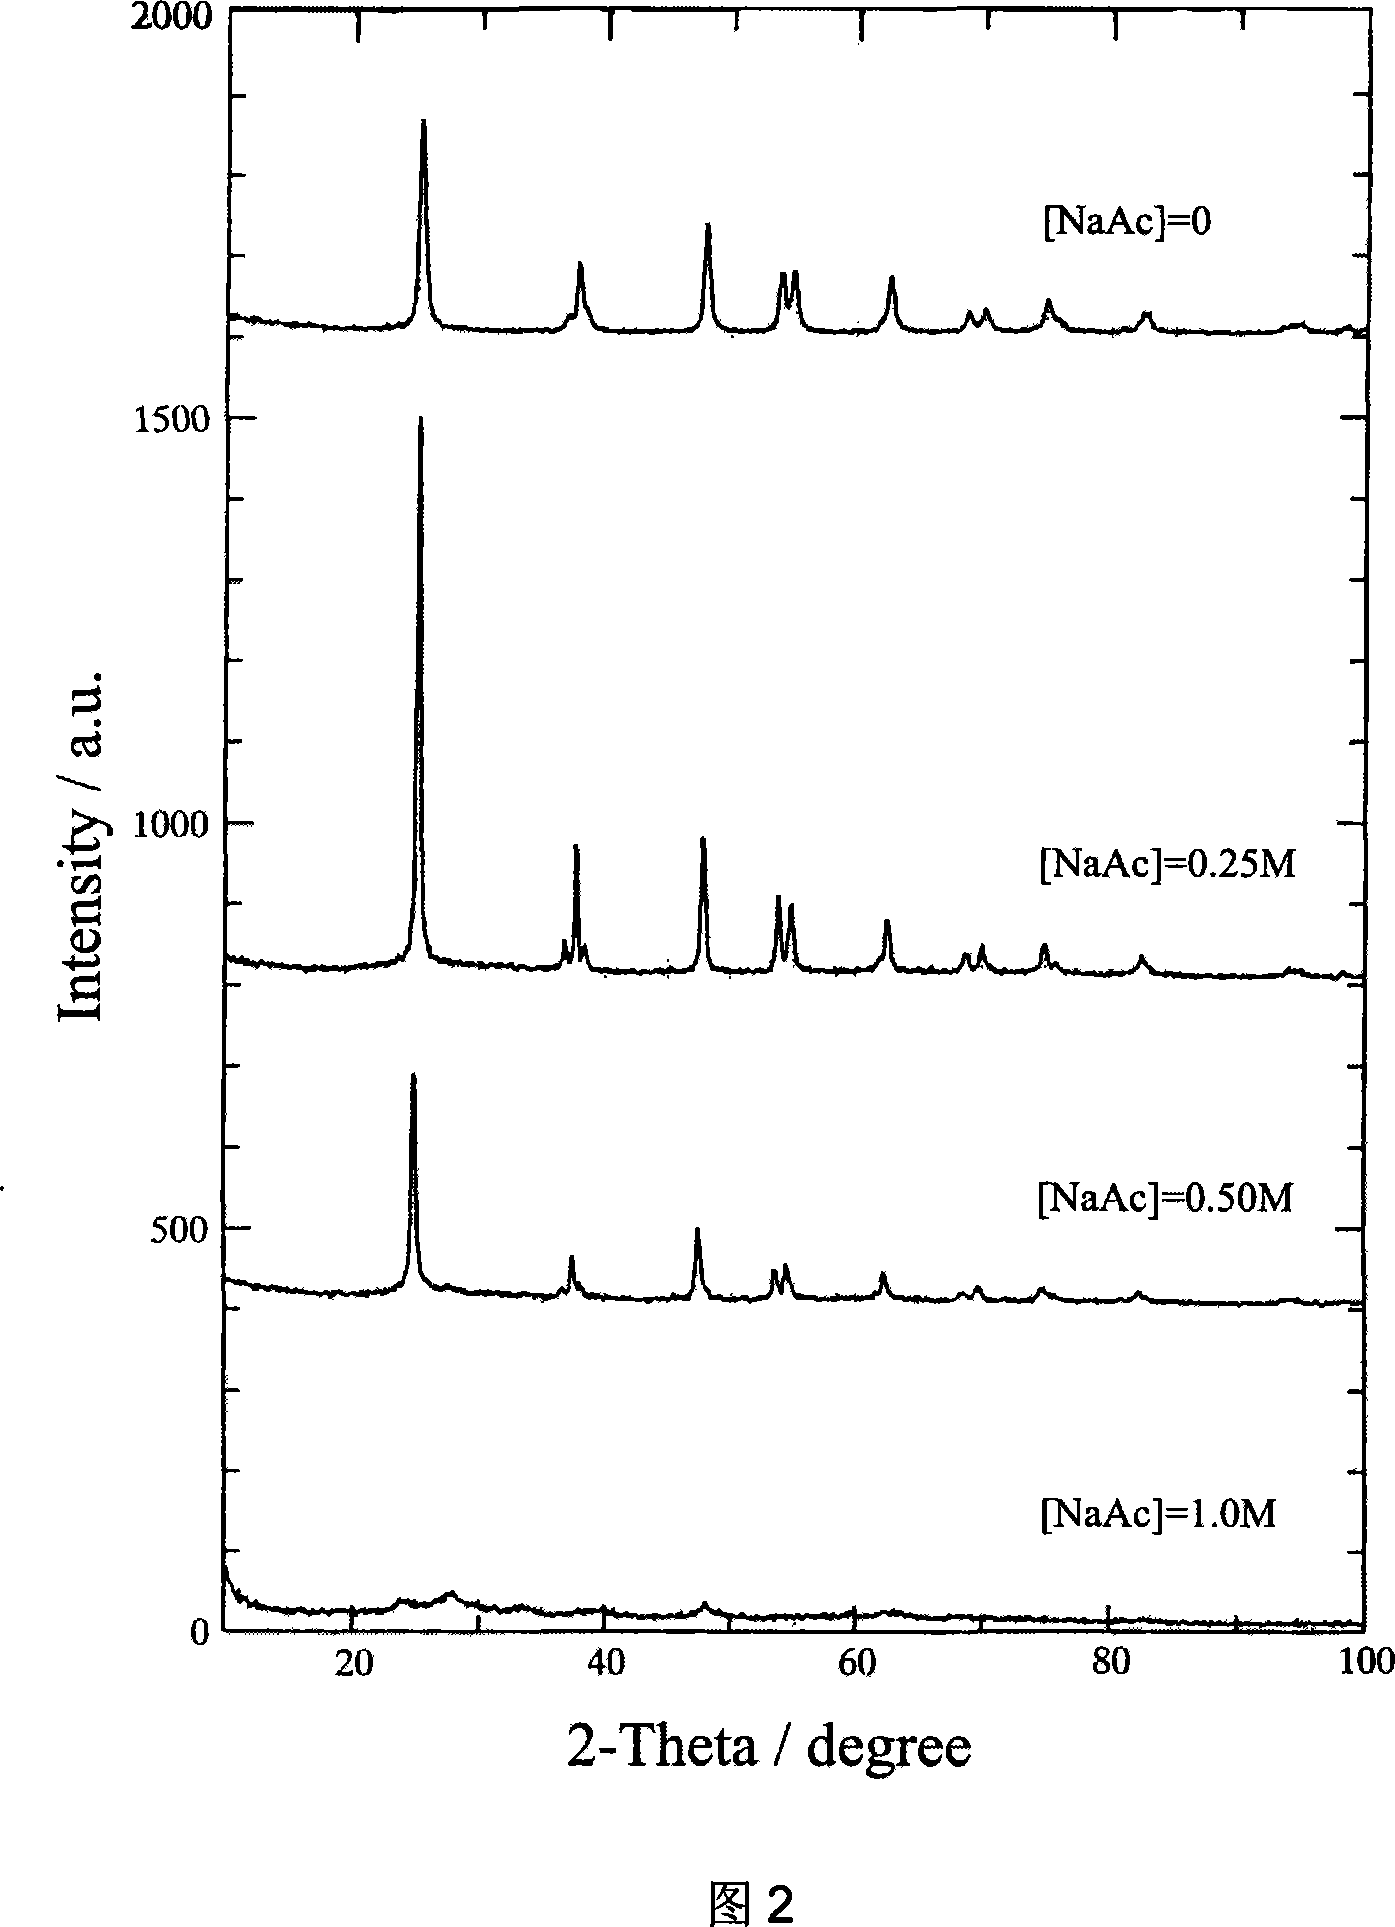 Method for controlling nano-anatase TiO* feature with NaAc as additive agent